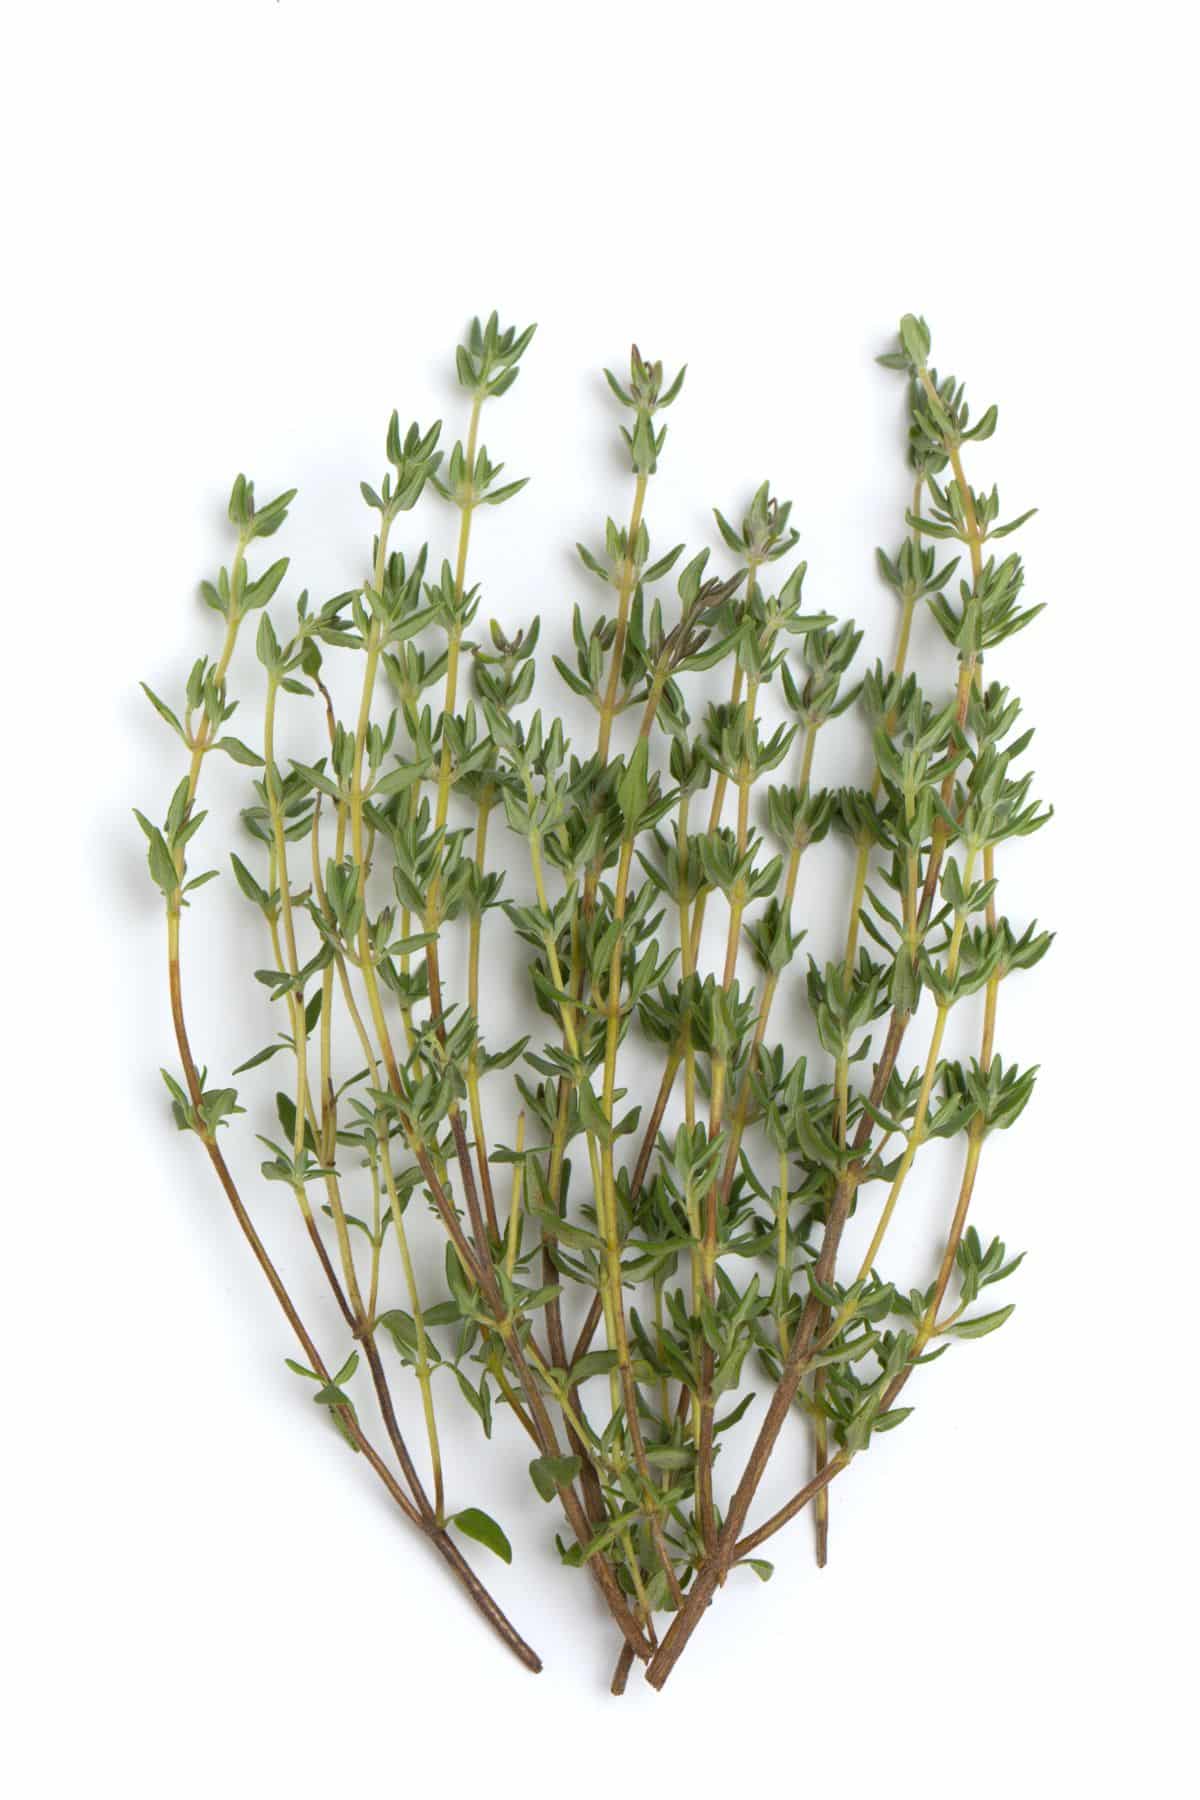 Bunch of fresh thyme on white background.